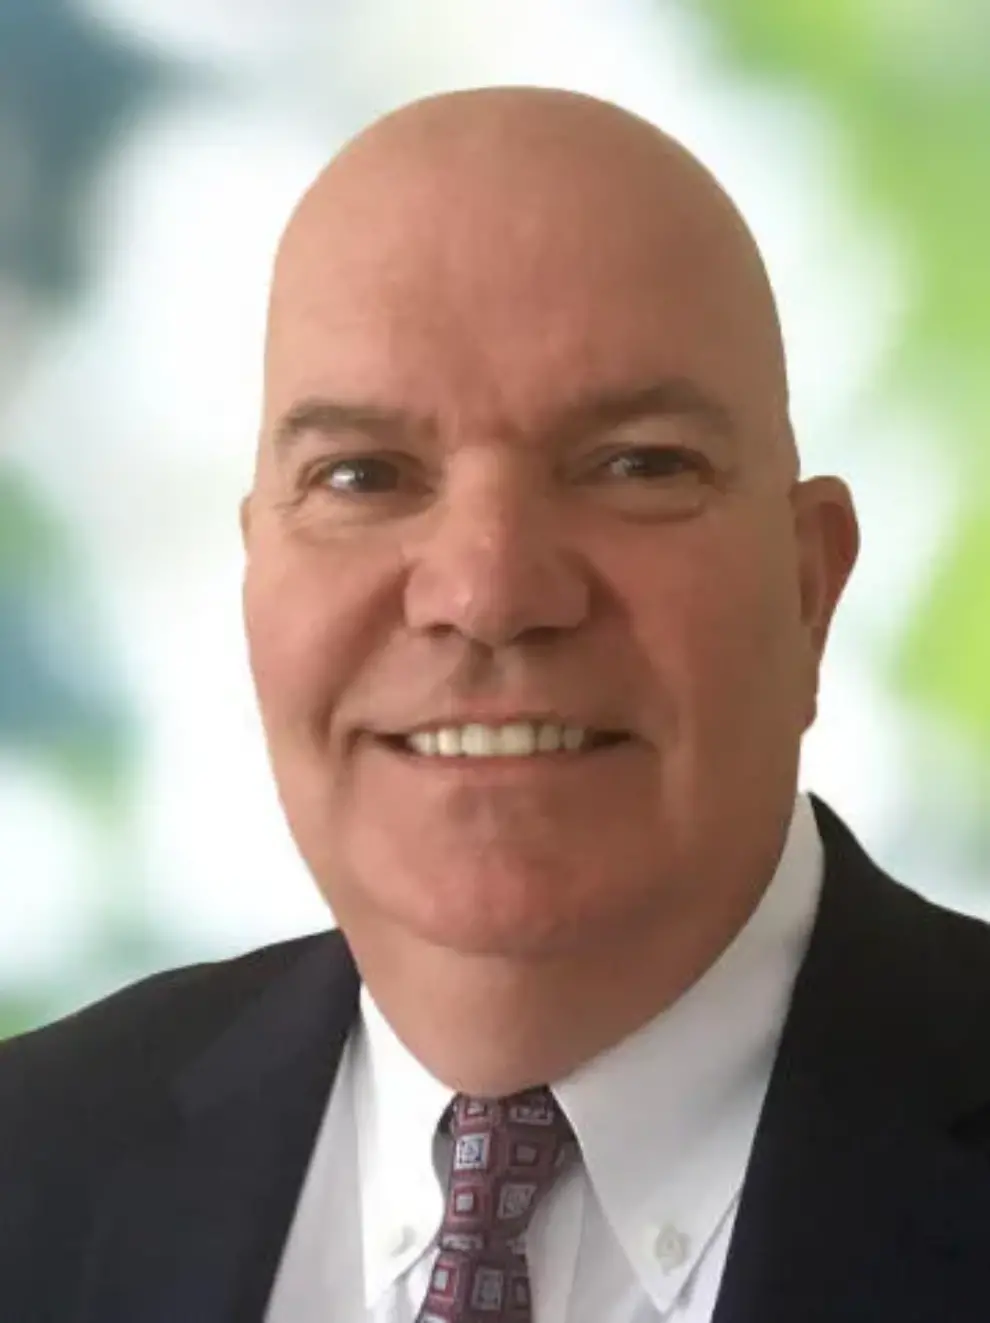 Dennis Boone joins AKF Group as Senior Director of Smart Buildings